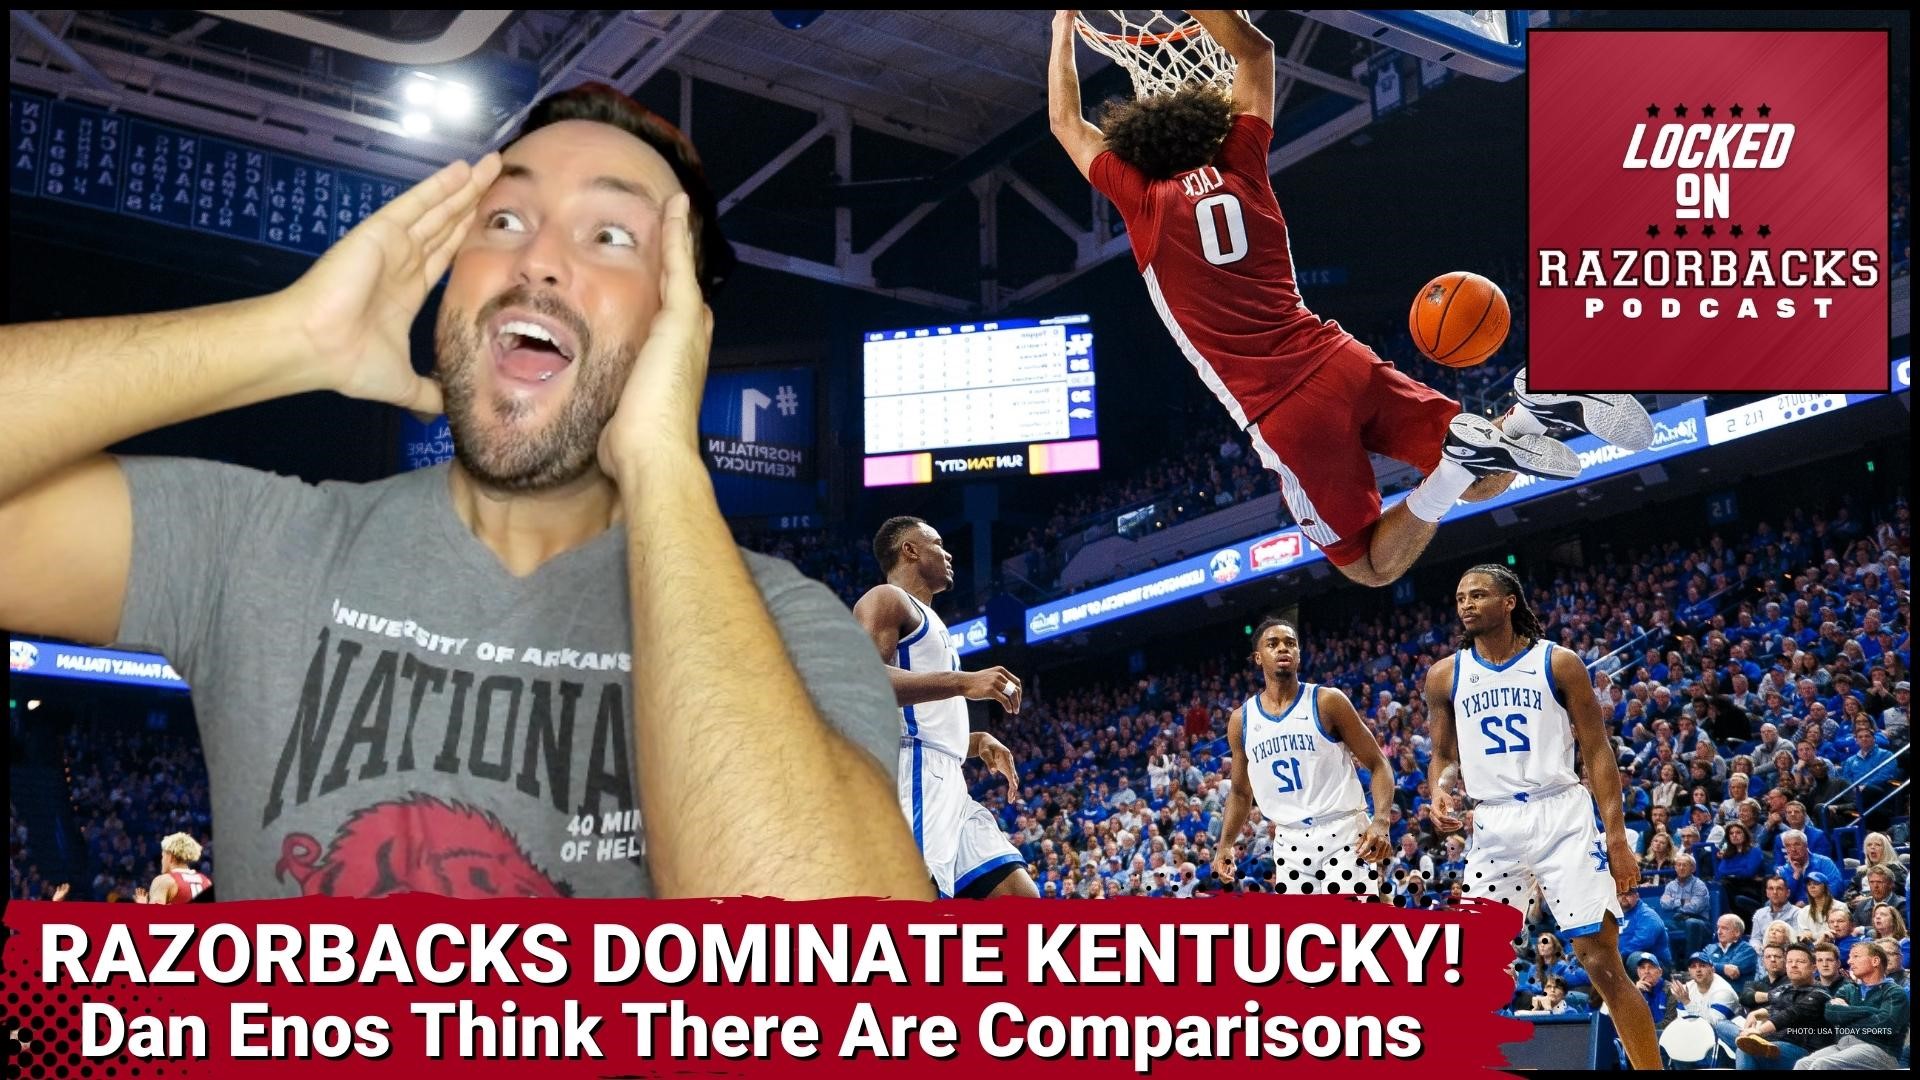 Razorback Basketball defeated the Kentucky Wildcats 88-73 last night in Rupp Arena and why this game is one of the best performances of the season by the Hogs.